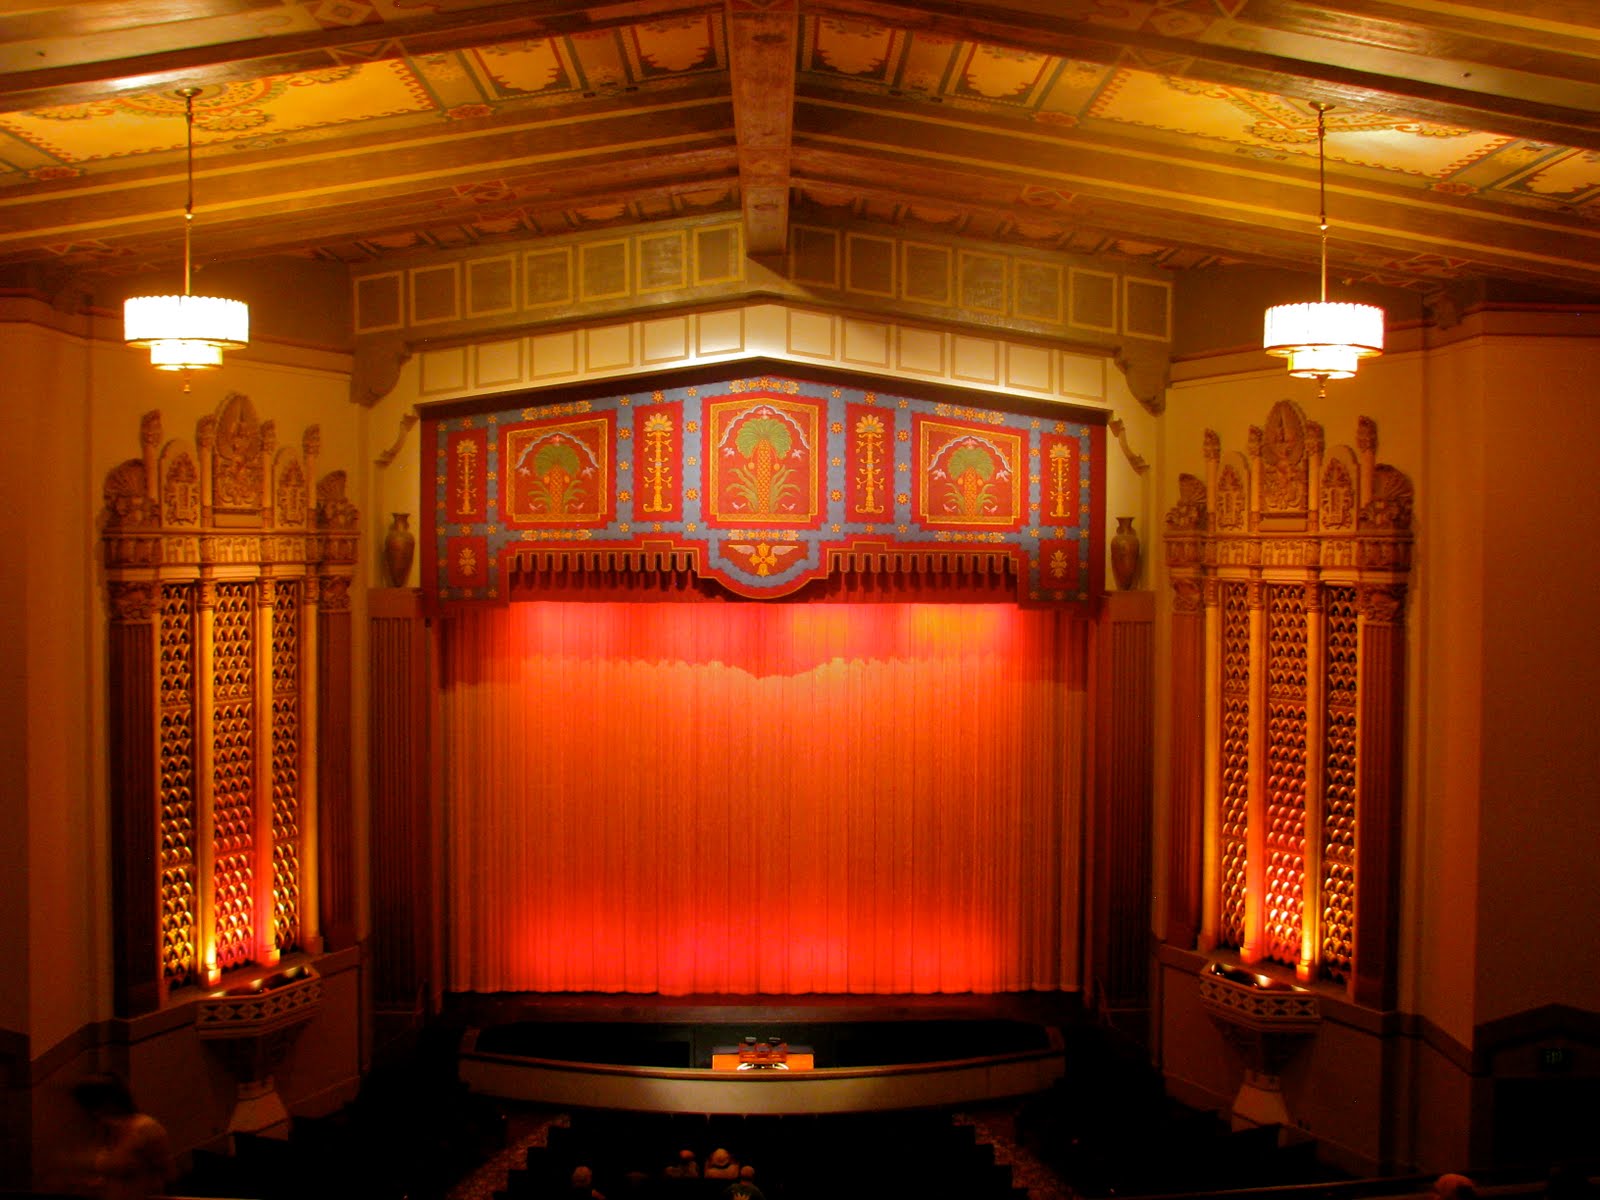 At The Movie House: The Stanford Theatre